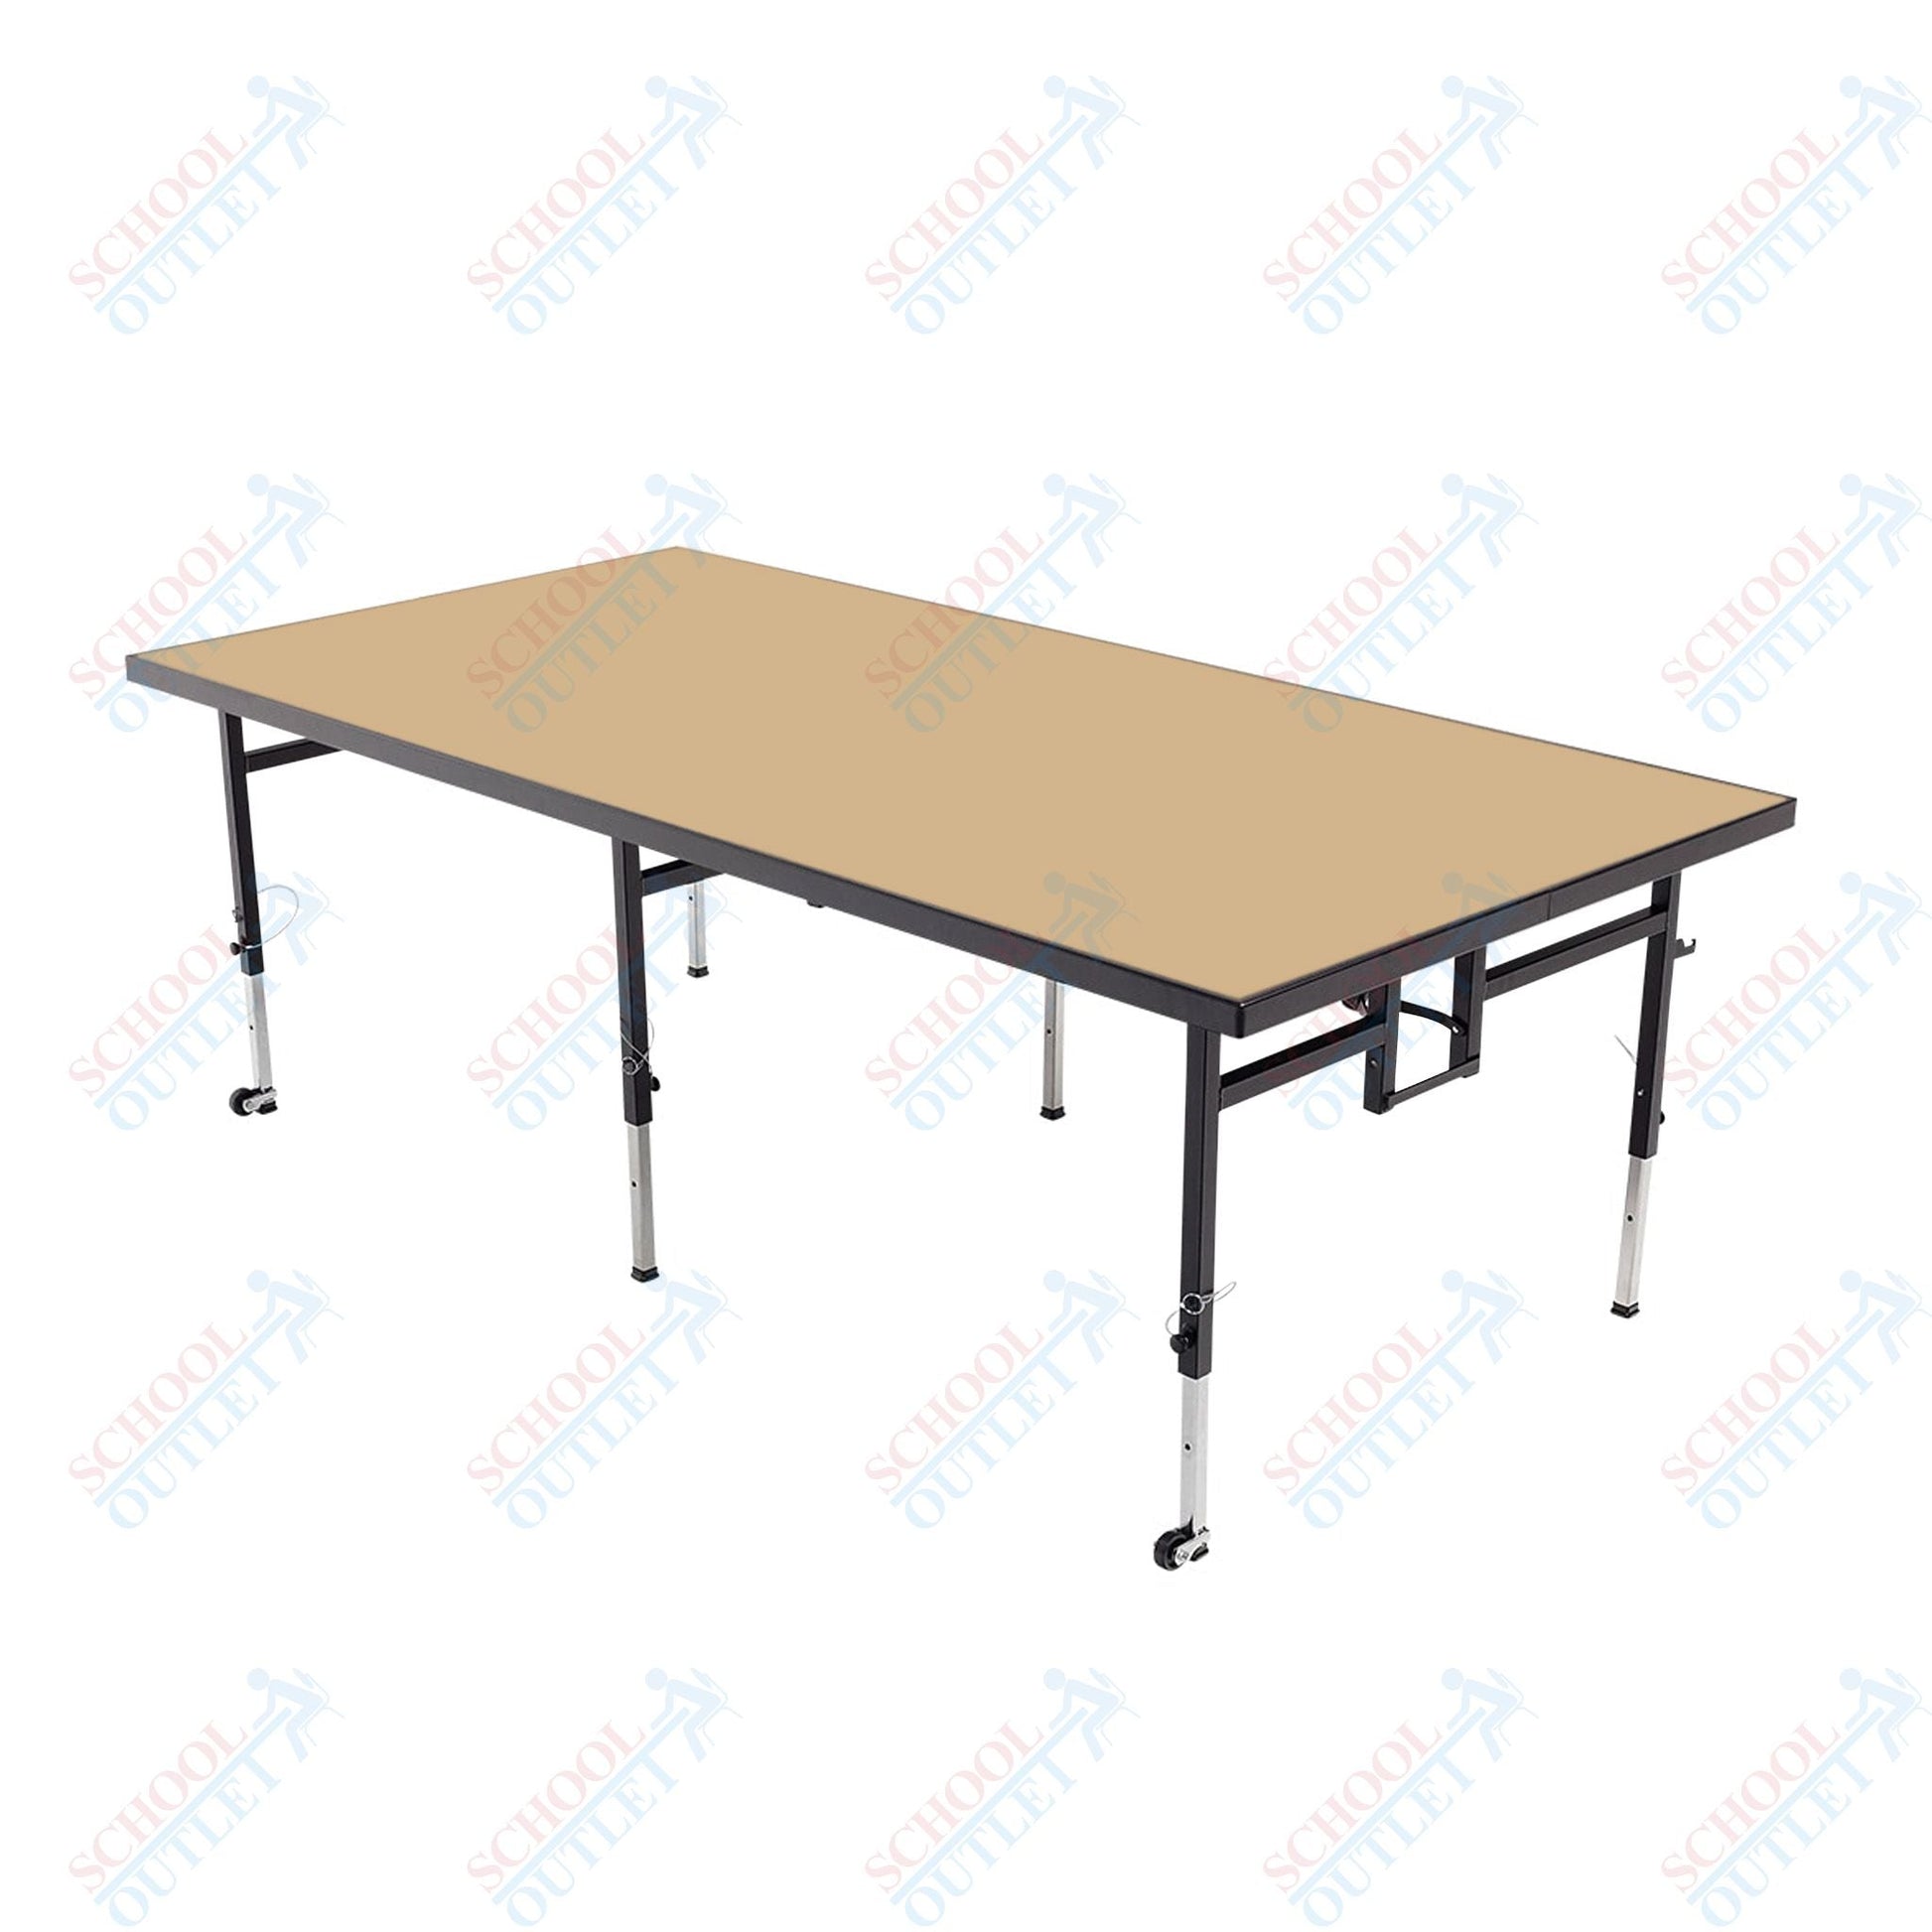 AmTab Adjustable Height Stage - Carpet Top - 48"W x 48"L x Adjustable 16" to 24"H (AmTab AMT-STA4416C) - SchoolOutlet